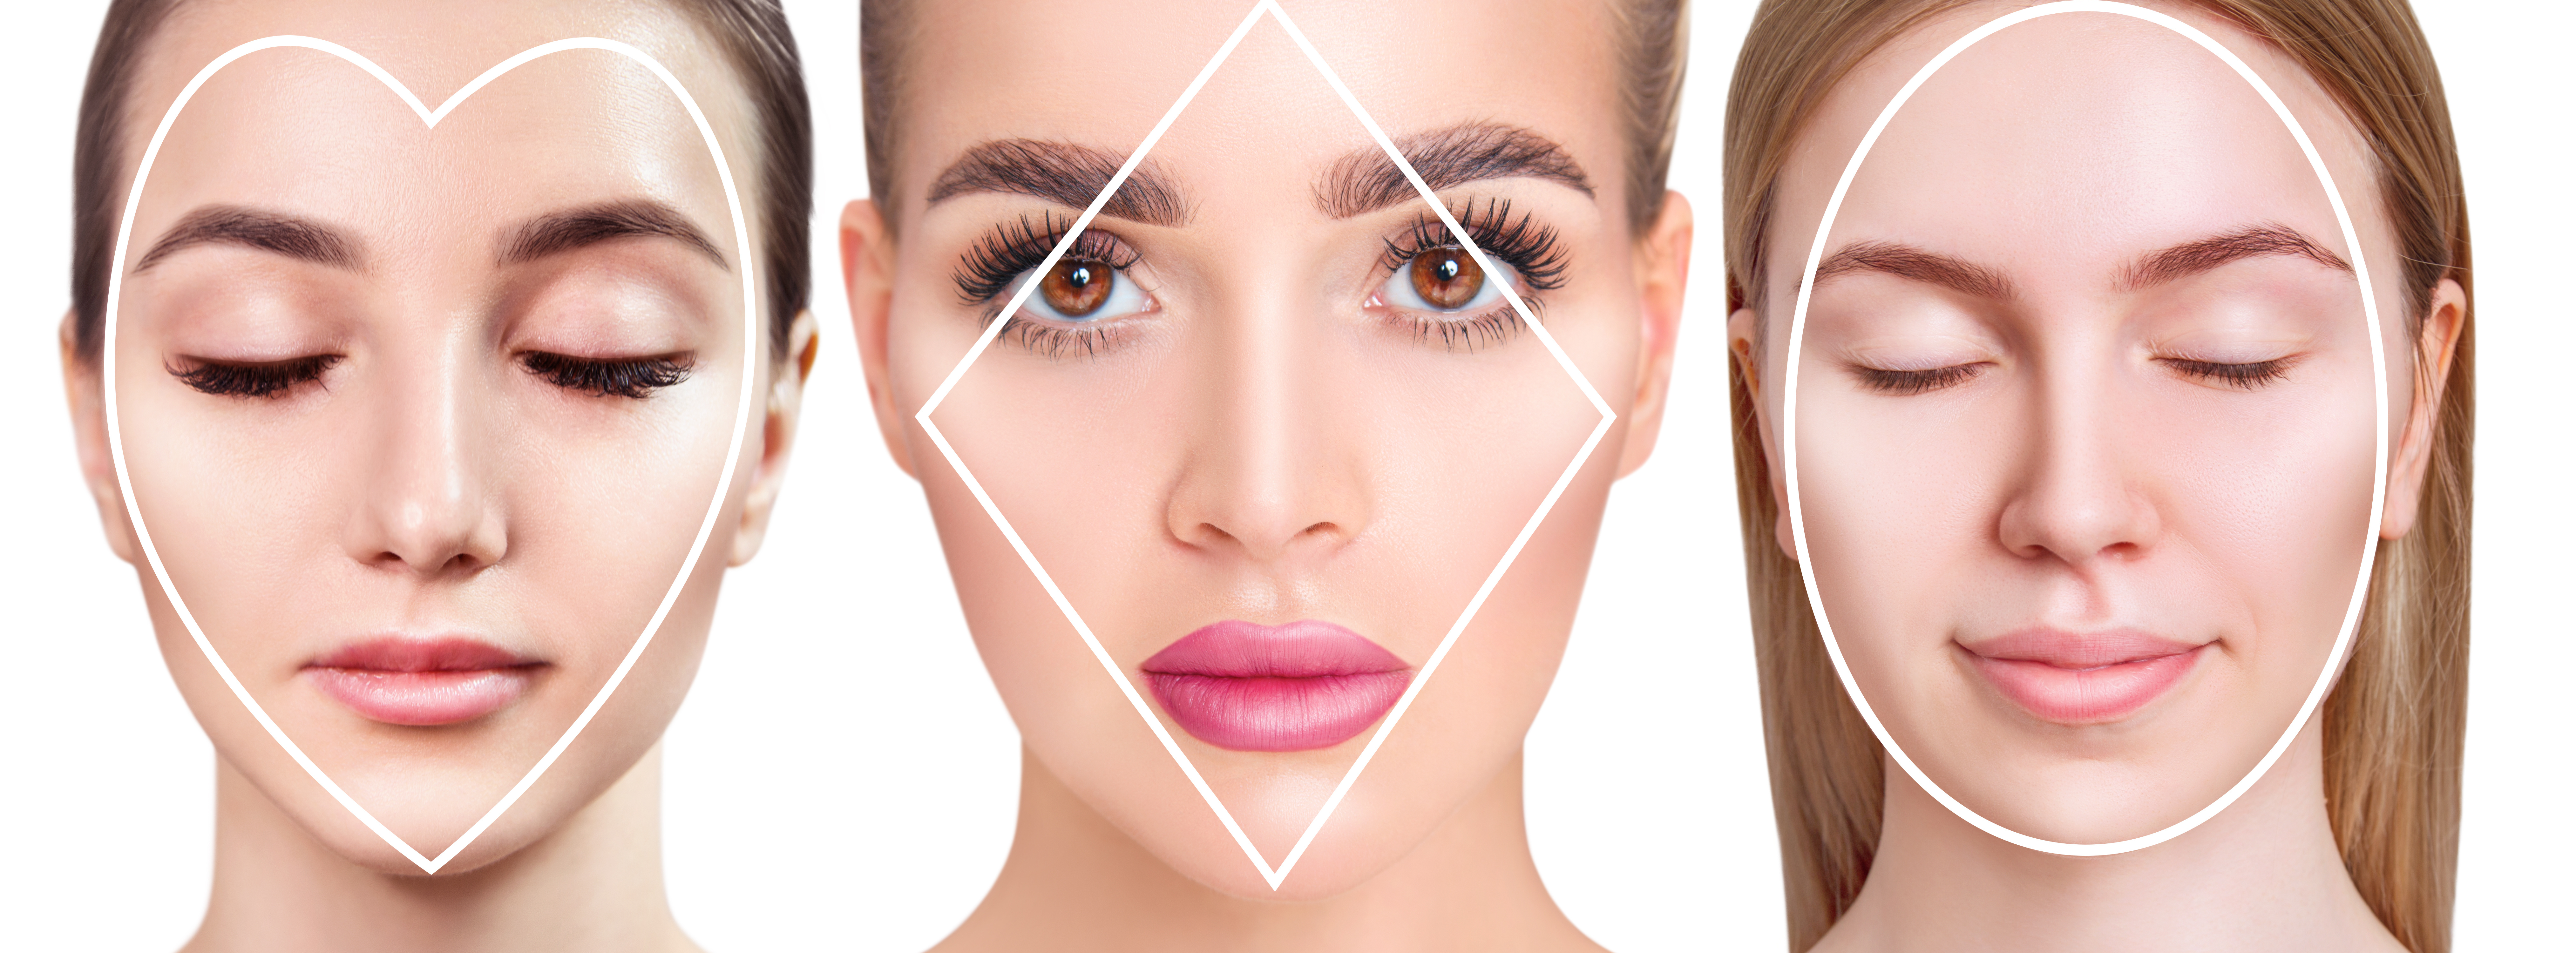 How to Make Fillers Work with Your Face Shape